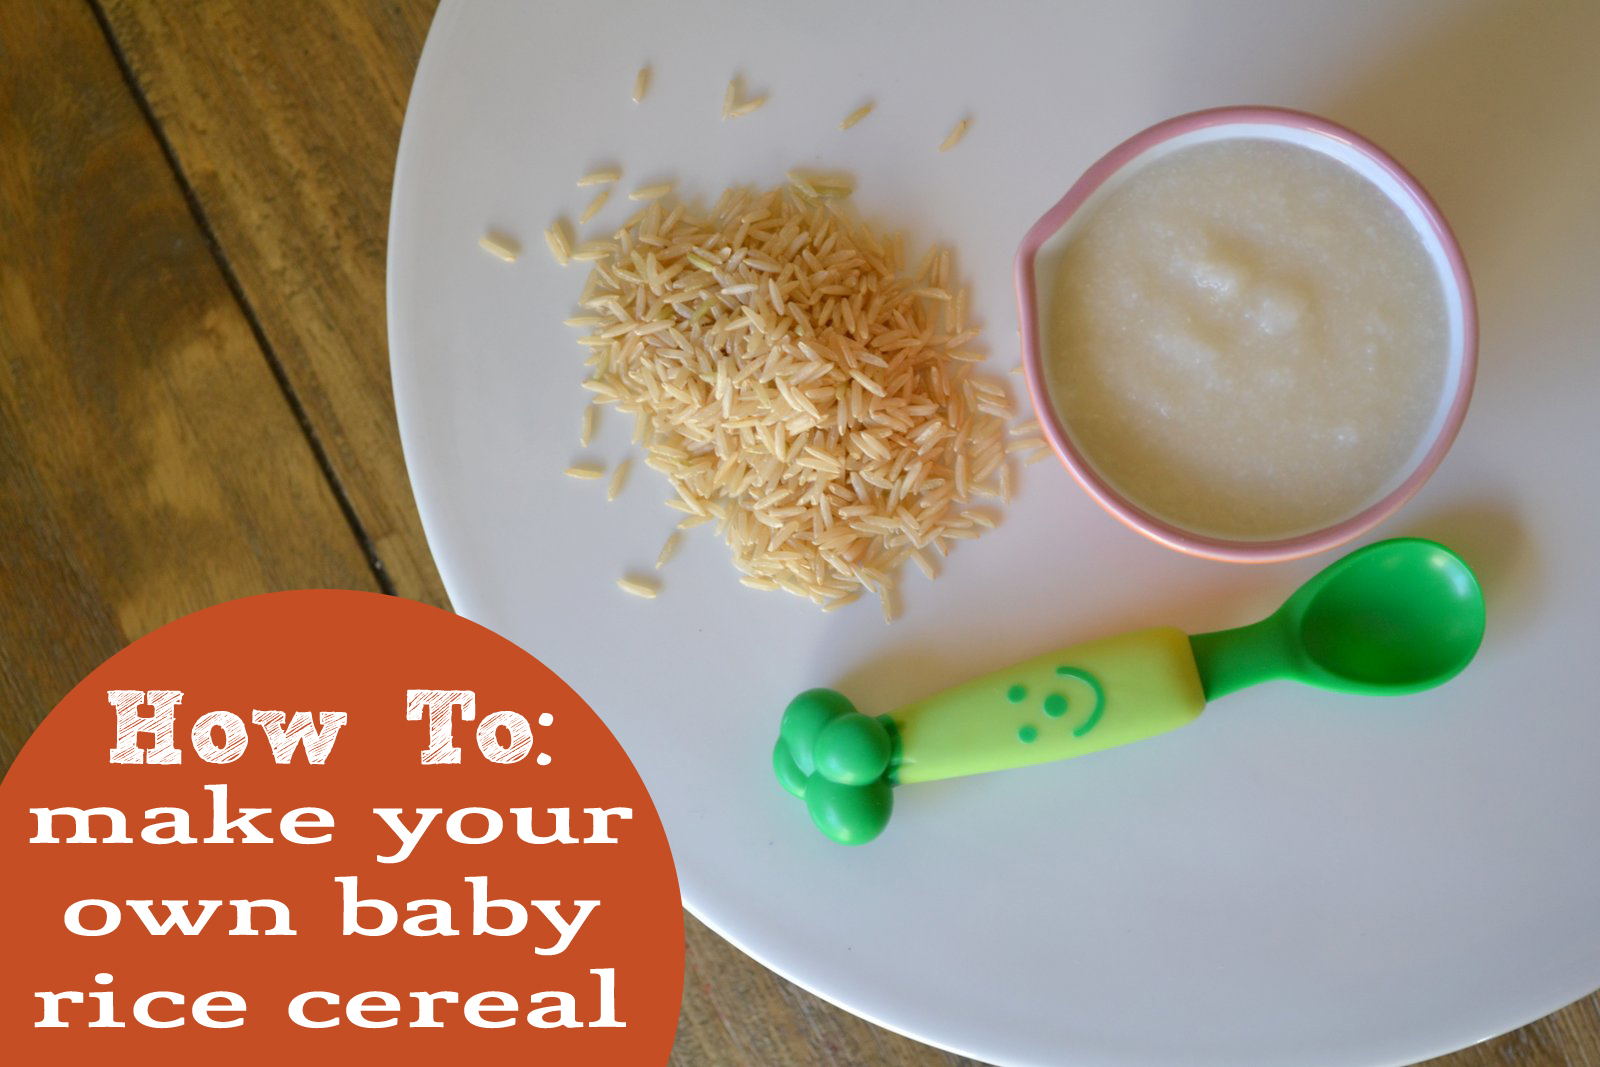 Have a healthy baby by making food with the Baby Bullet - I love My Kids  Blog